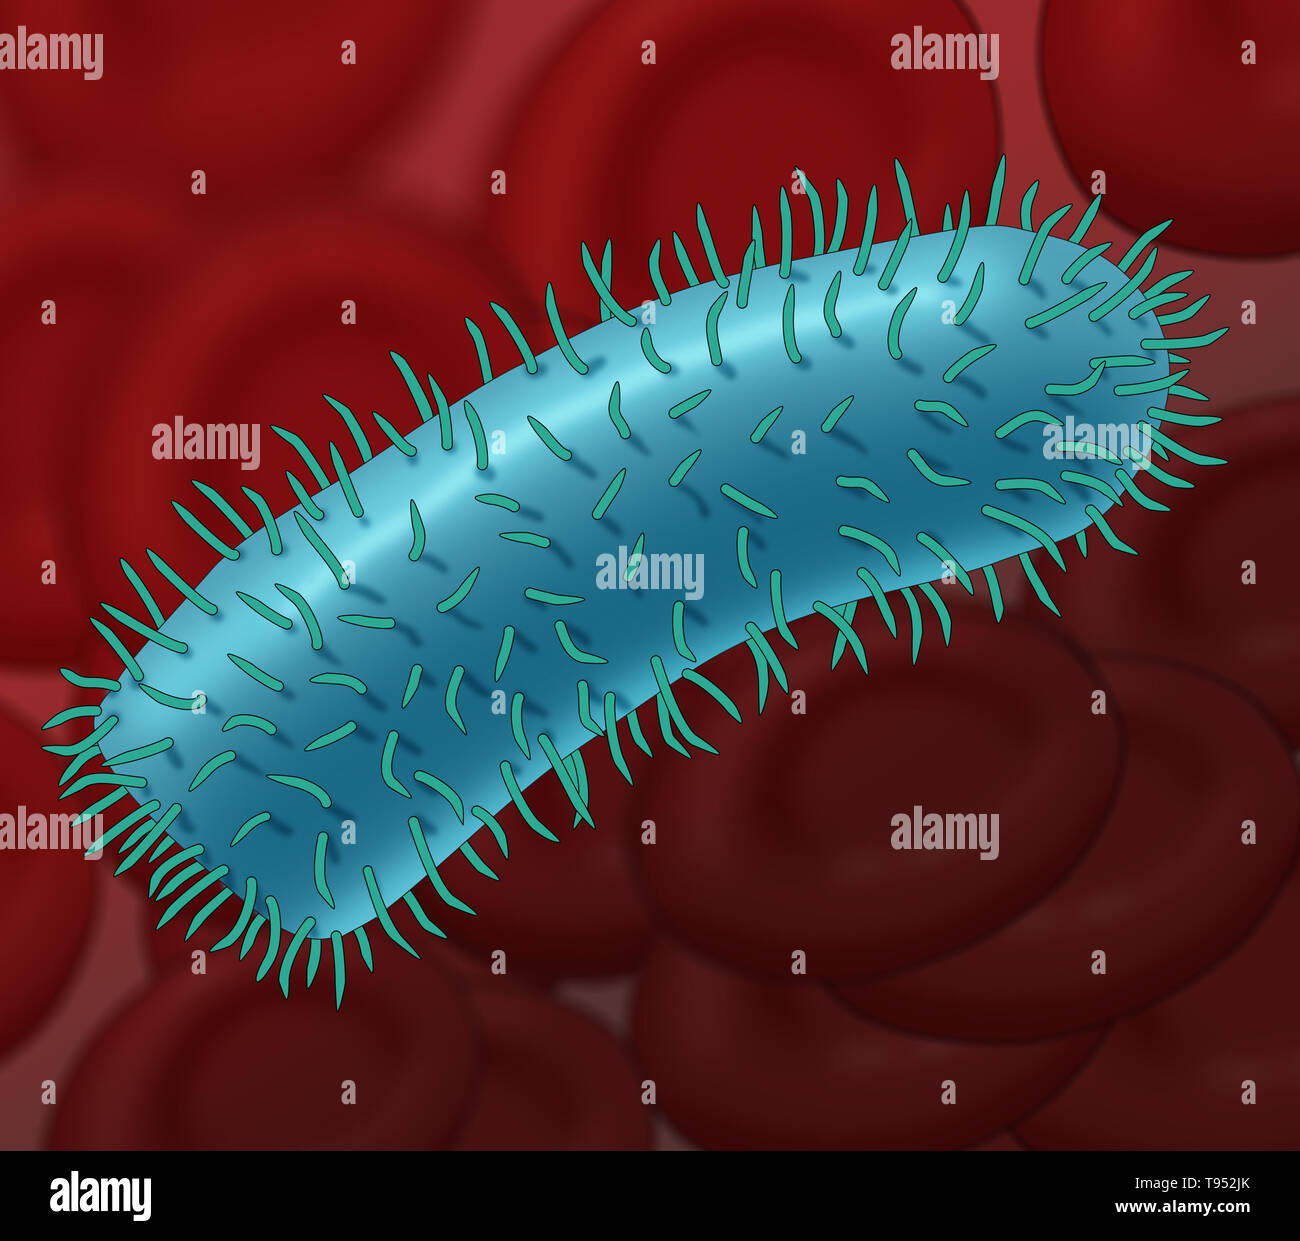 Illustration the rabies virus. Rabies virus is a neurotropic virus that causes rabies in humans and animals. The rabies virus has a cylindrical morphology and is the type species of the Lyssavirus genus of the Rhabdoviridae family. Stock Photo